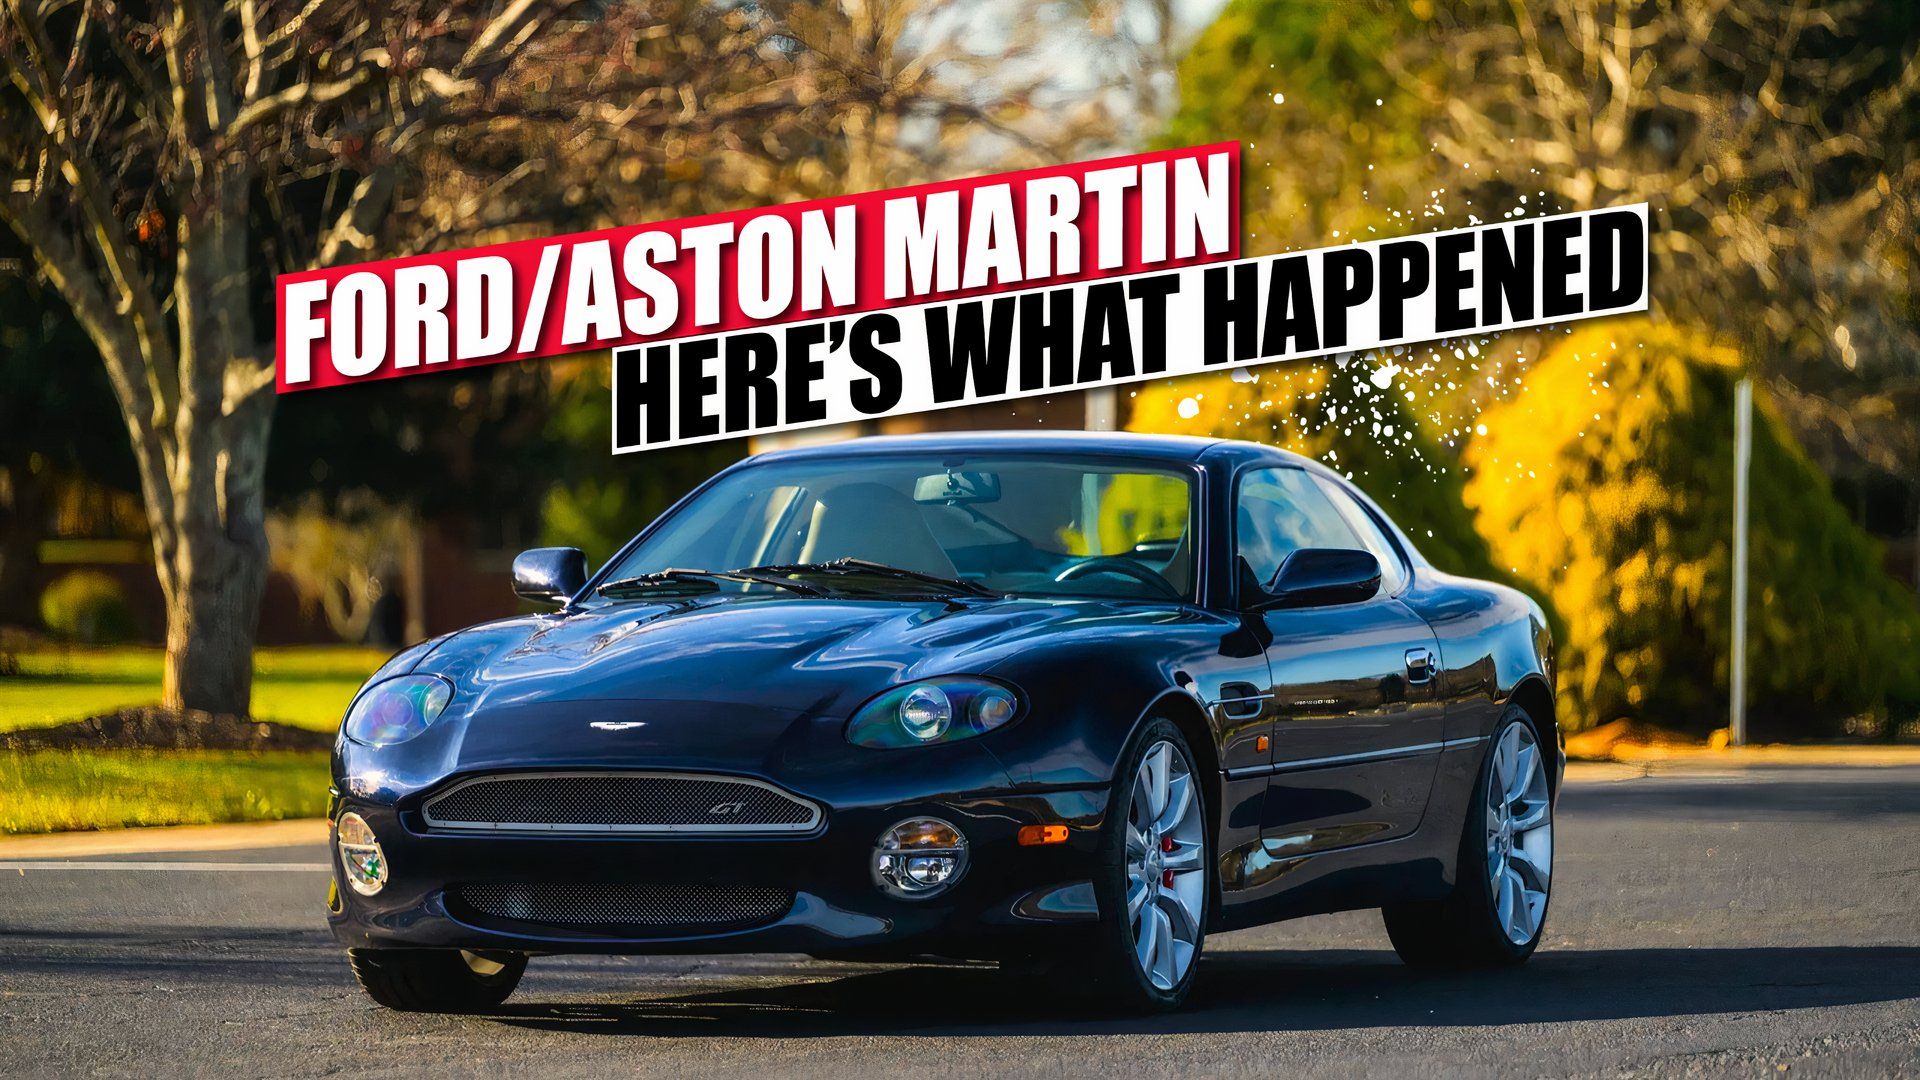 FORD-ASTON-WHAT-HAPPENED